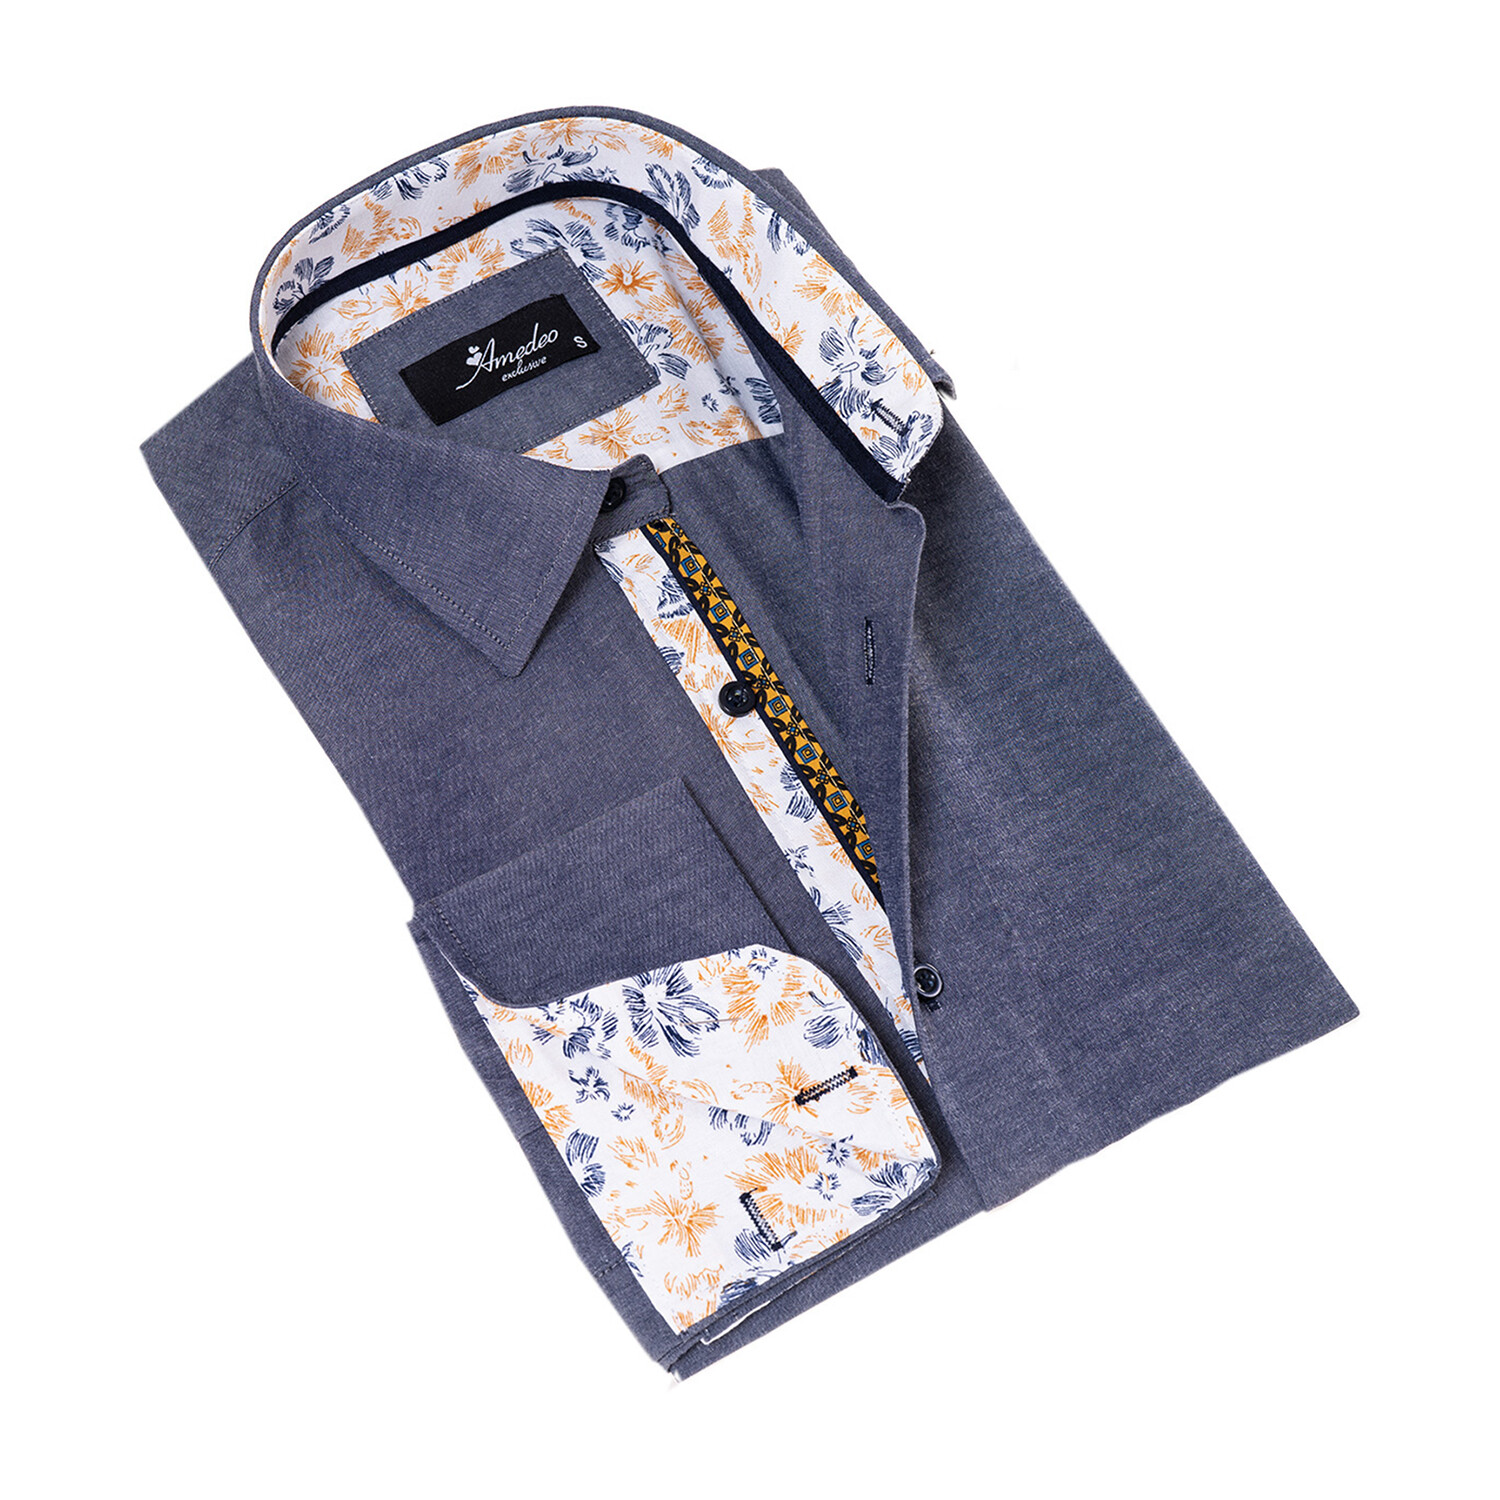 Reversible French Cuff Dress Shirt // Blue Floral Lined (S) - Amedeo ...